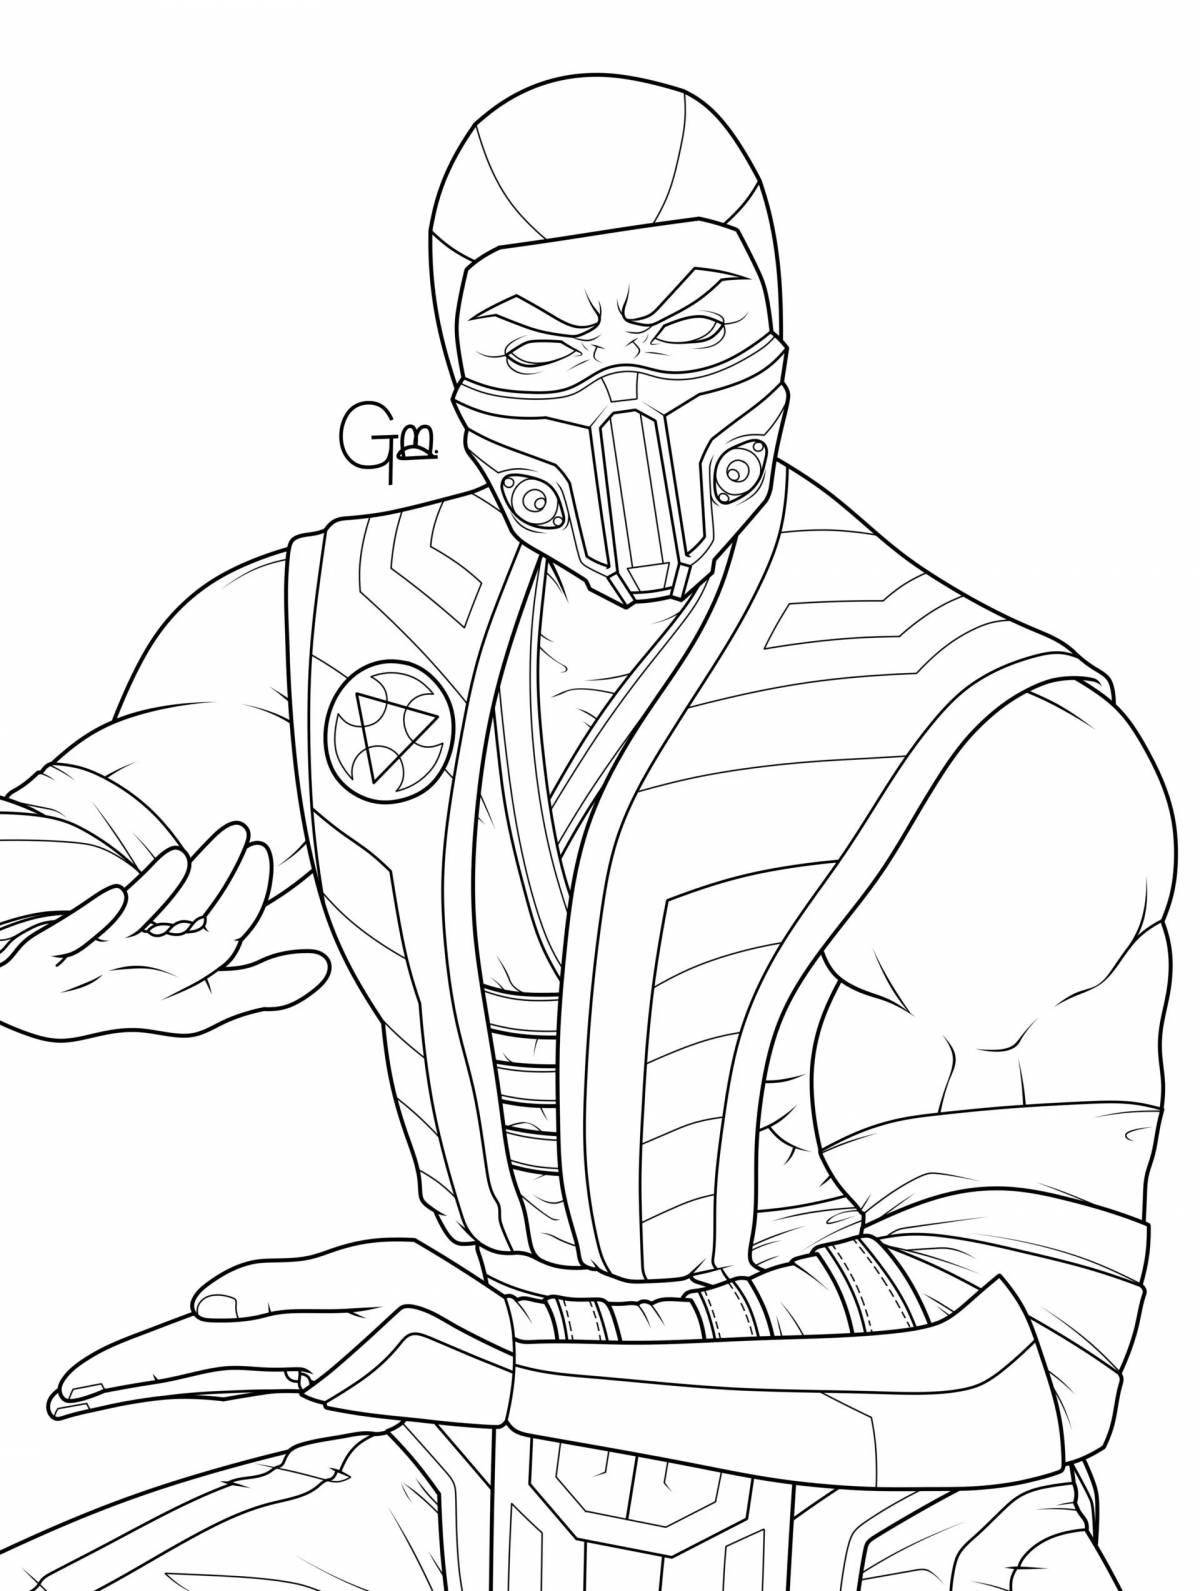 Charming scorpion coloring page